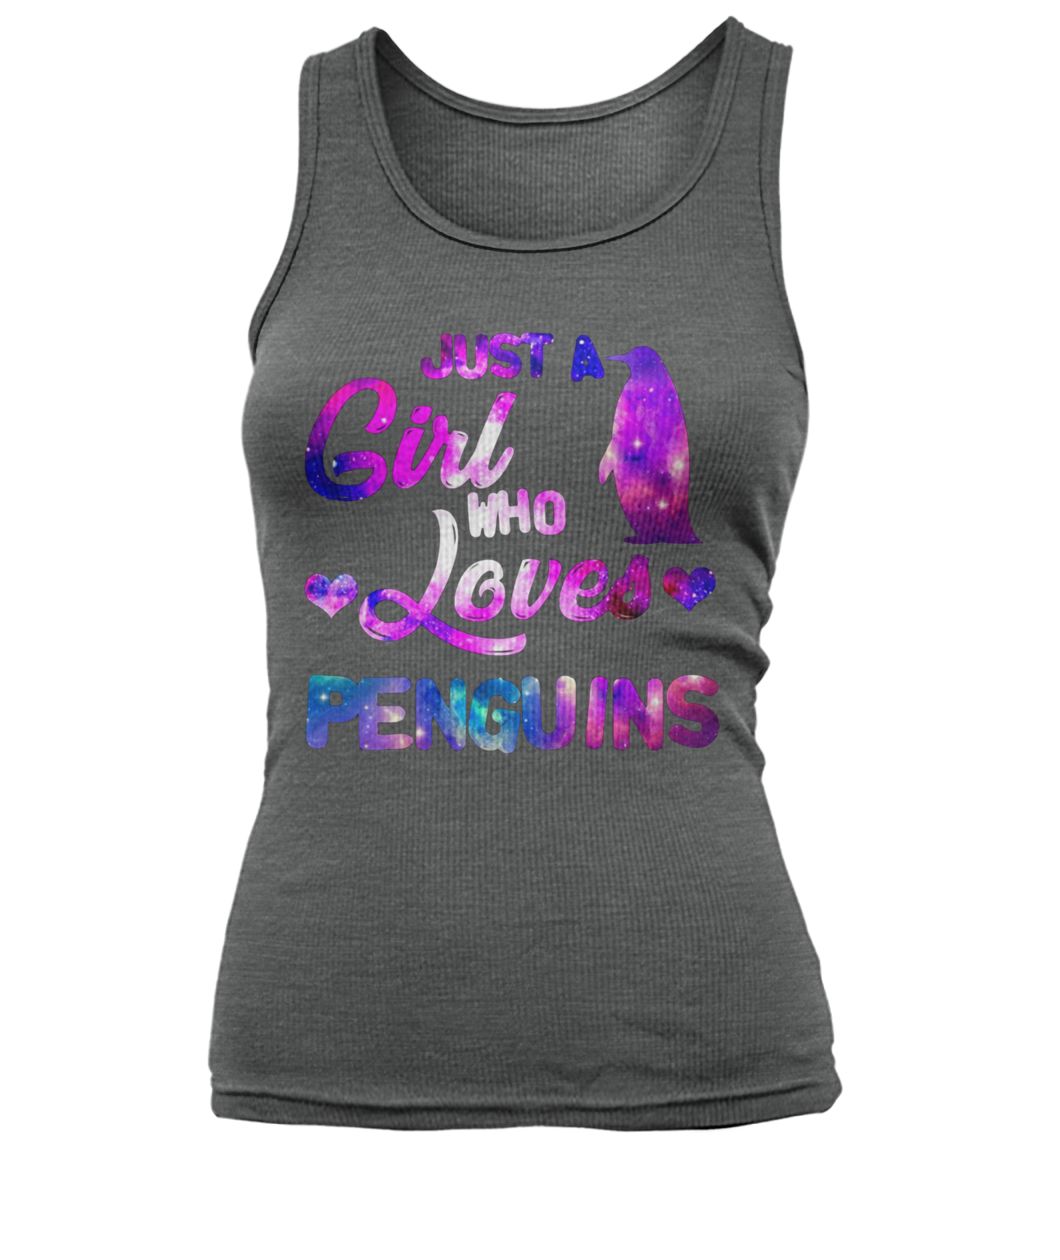 Just a girl who loves penguins galaxy women's tank top